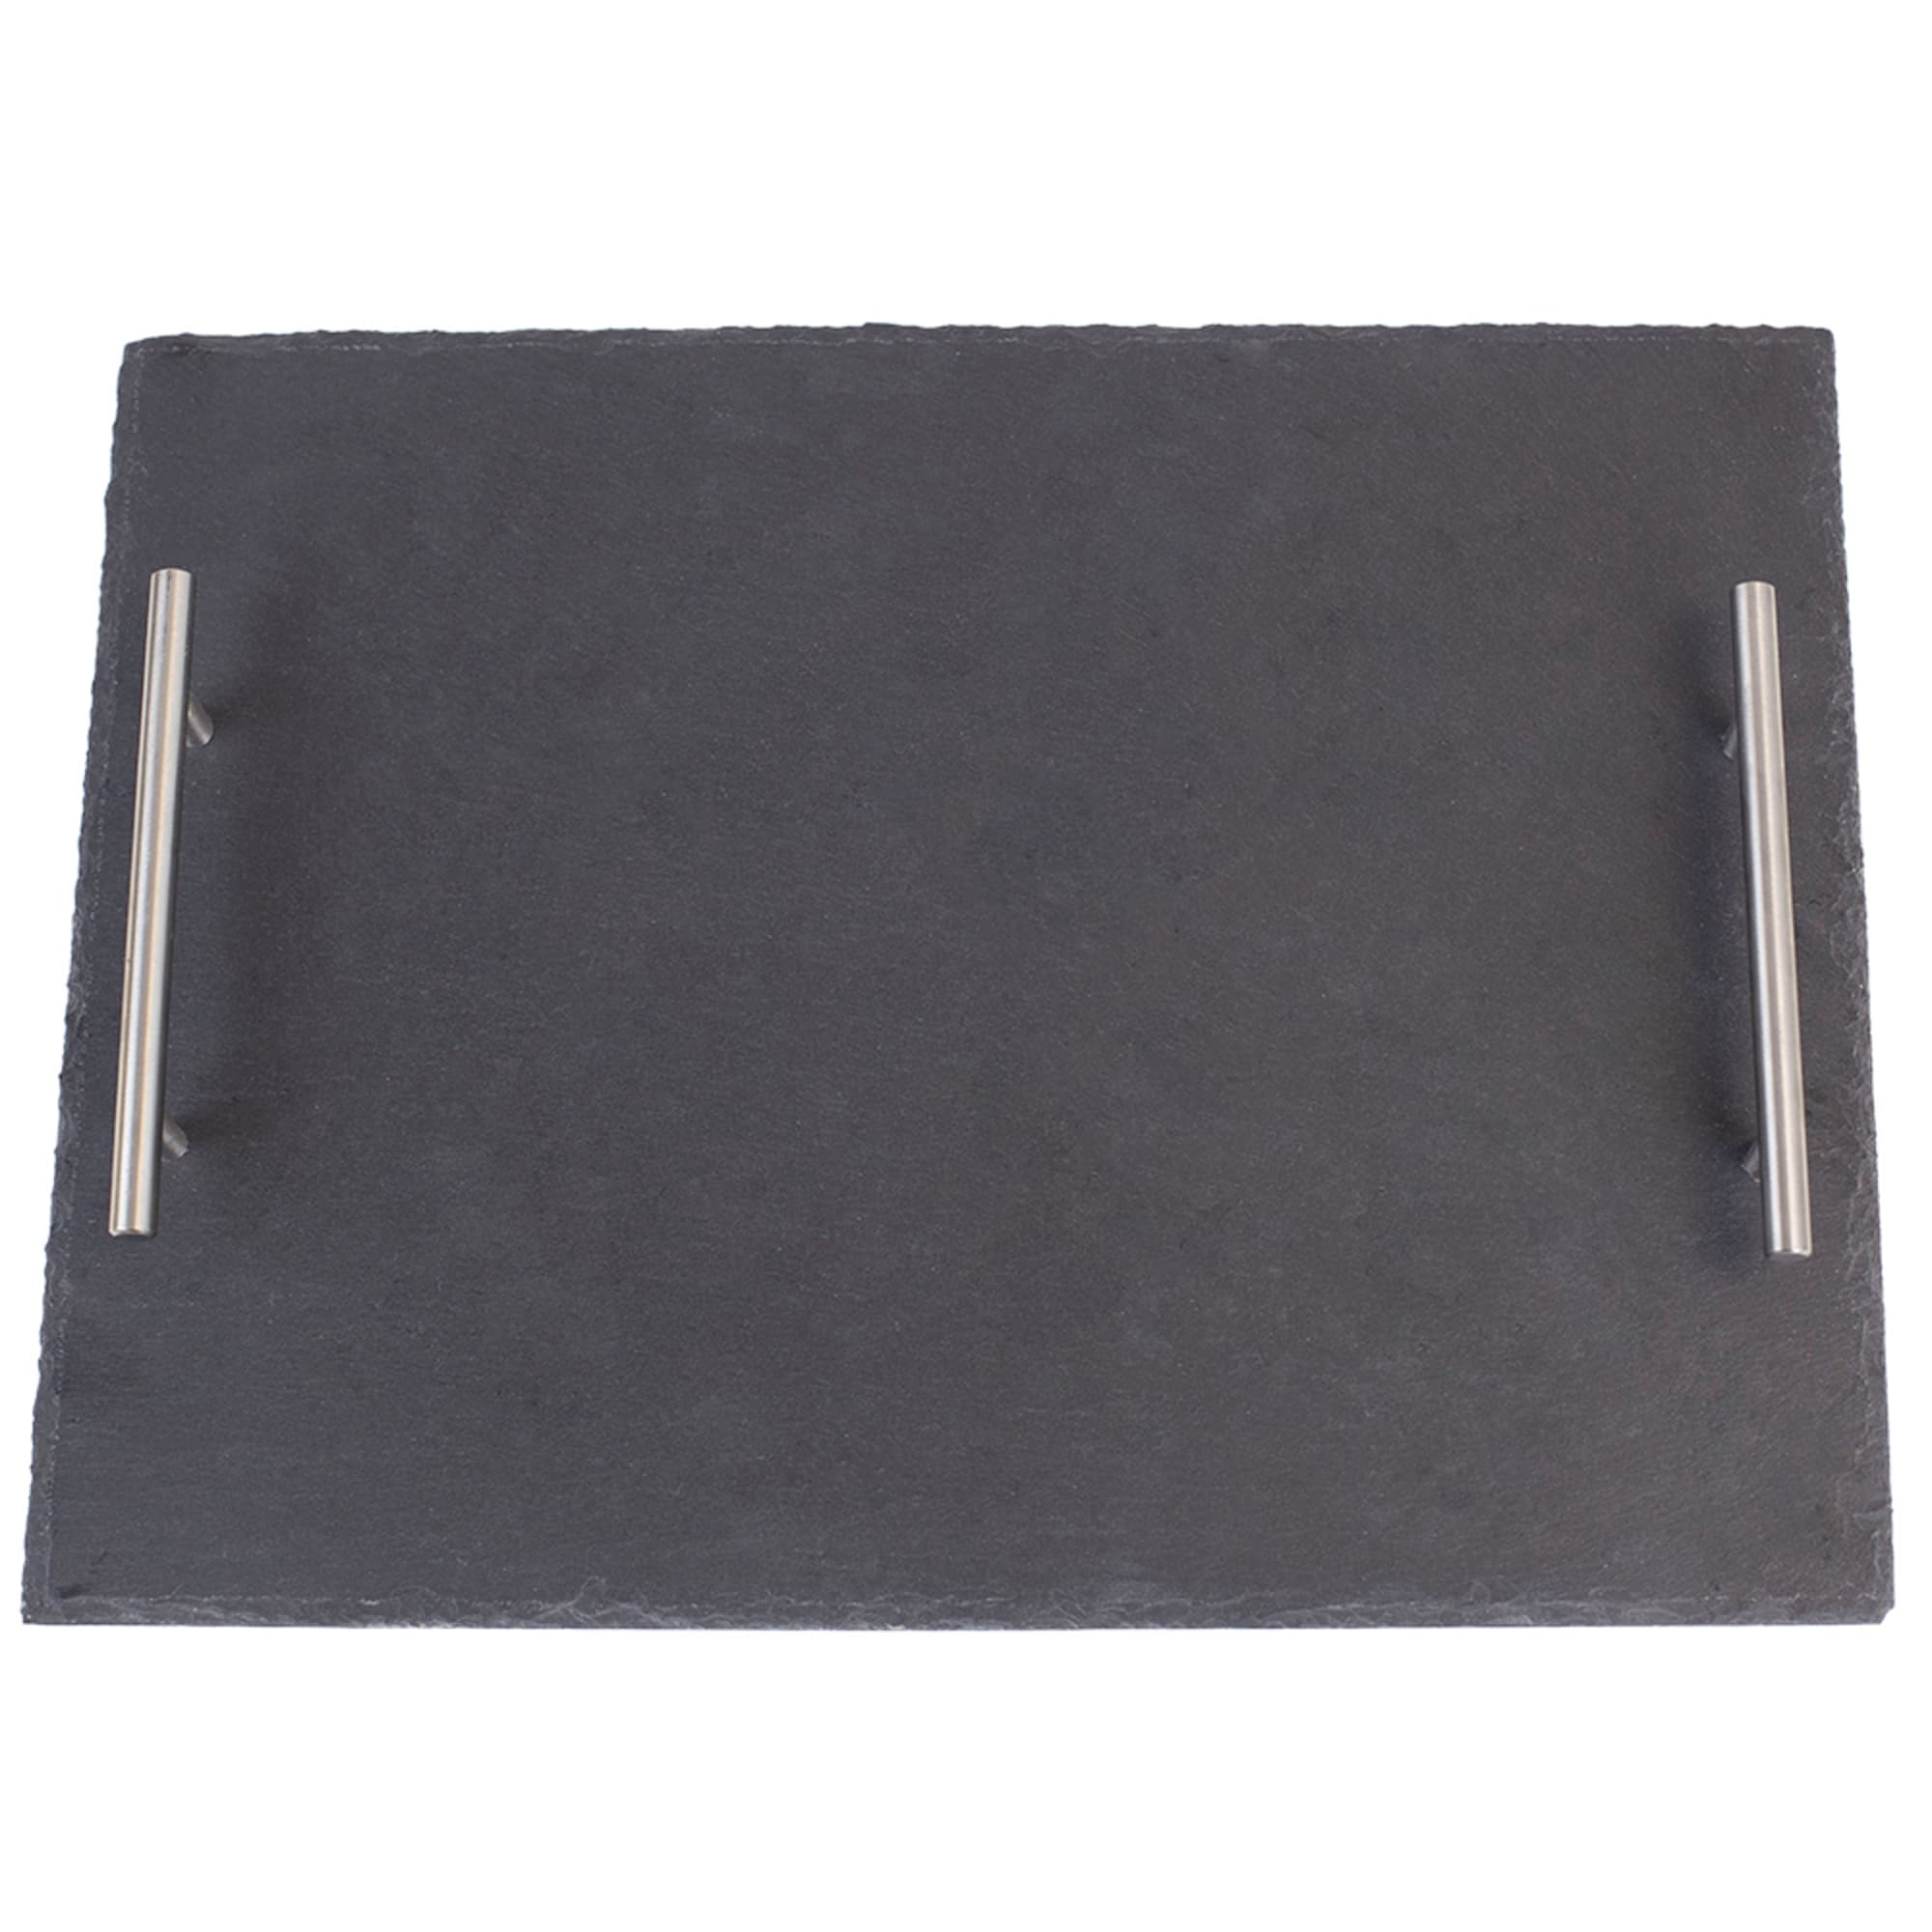 Home Basics Slate Serving Tray with Stainless Steel Handles, Black $10.00 EACH, CASE PACK OF 4